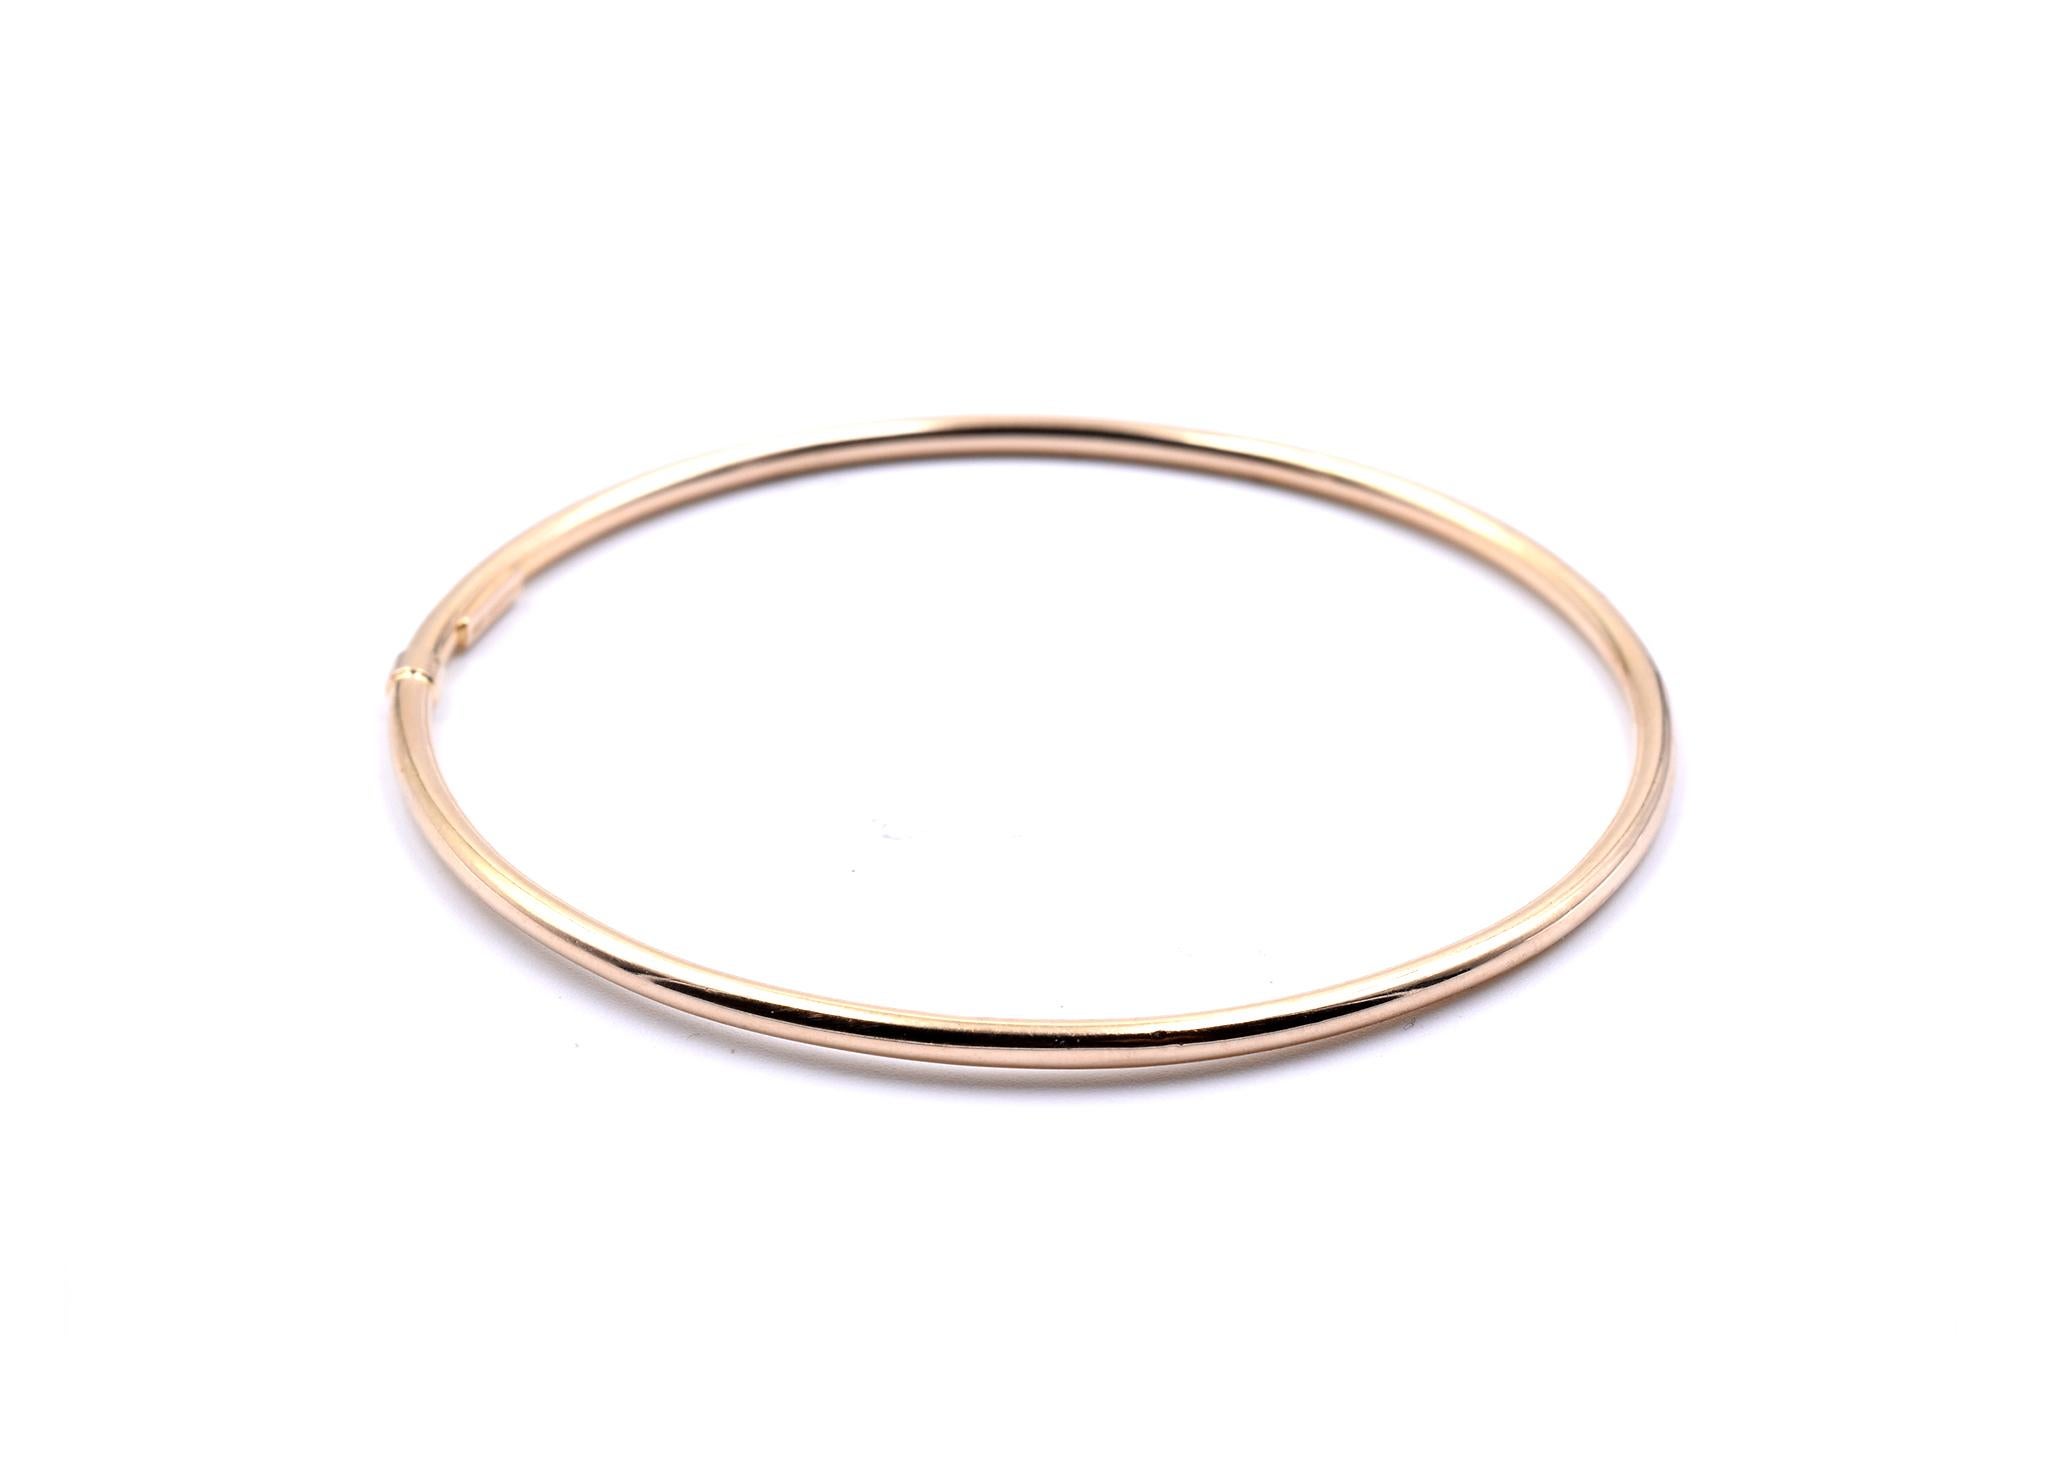 Designer: custom design
Material: 14k yellow gold
Dimensions: bracelet will fit an 8-inch wrist and it is 2.44mm wide
Weight: 2.09 grams

